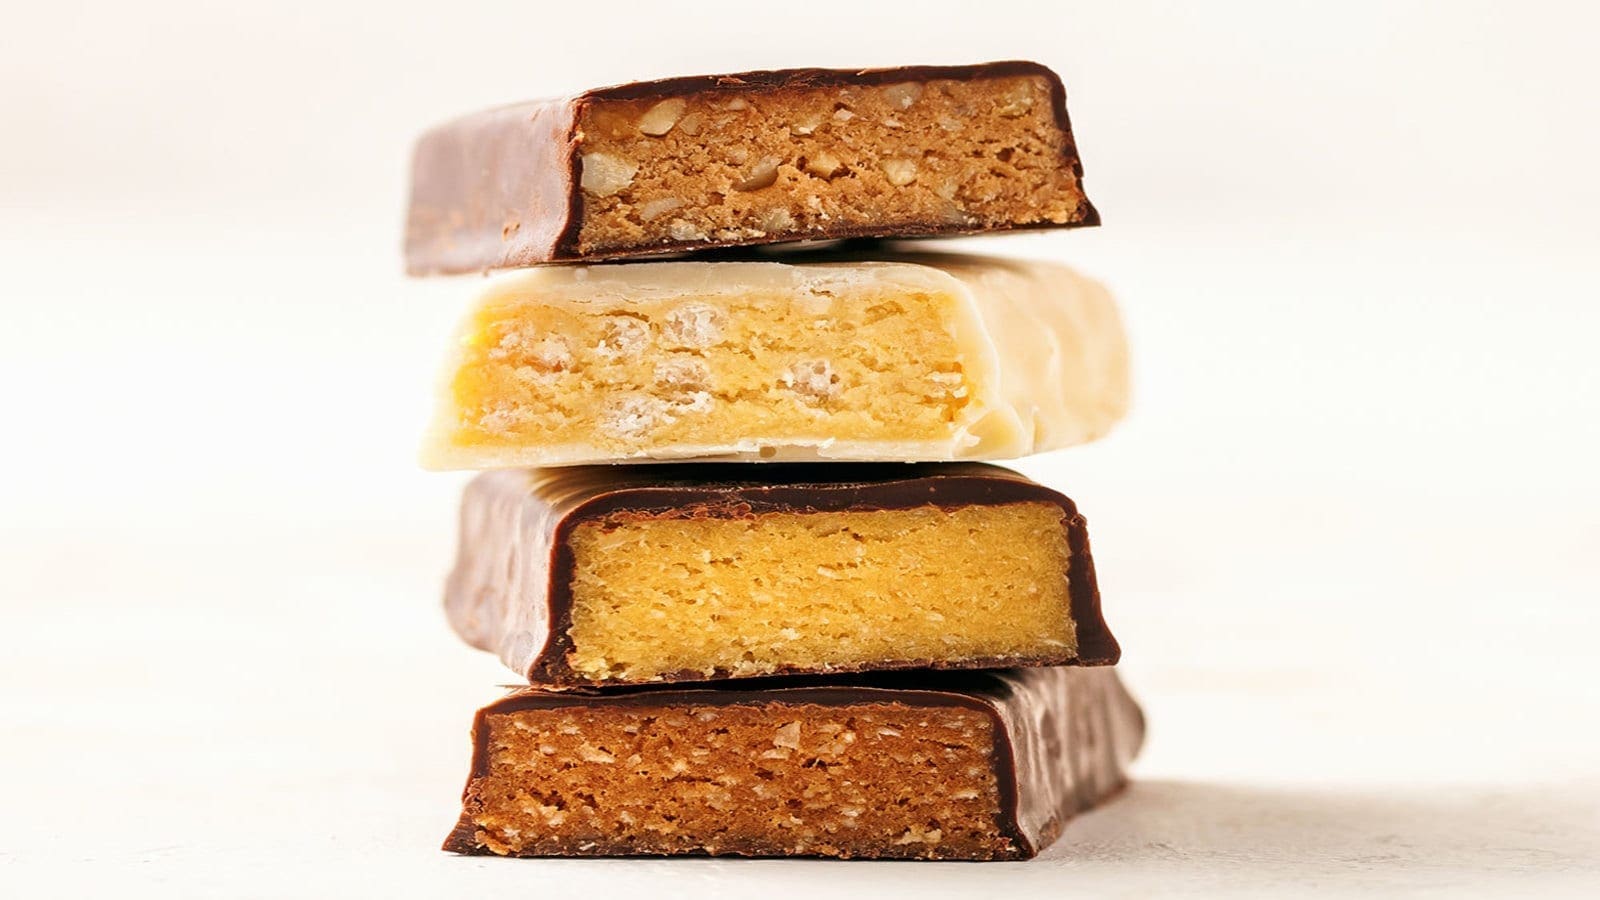 Friesland Campina Ingredients launches new product to aid in production of softer protein bars